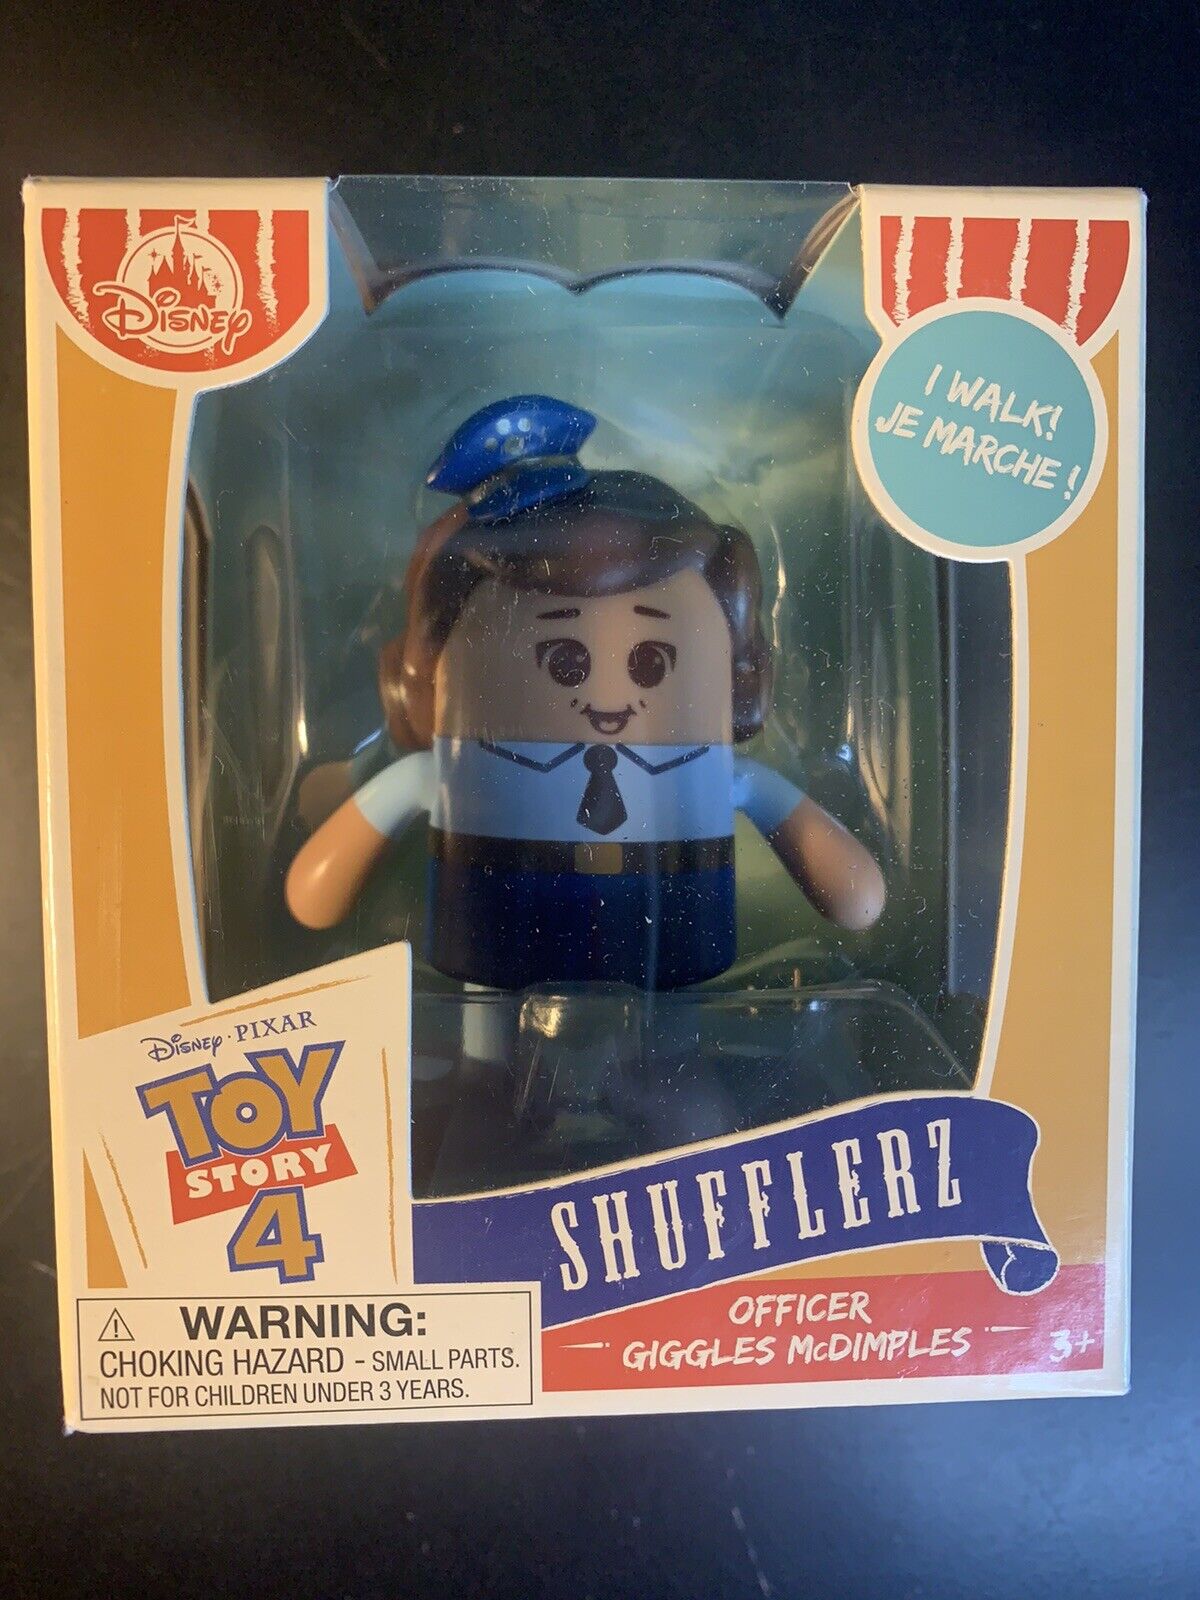 New Disney Store Toy Story 4 Shufflerz Officer Giggles McDimples Walking Figure